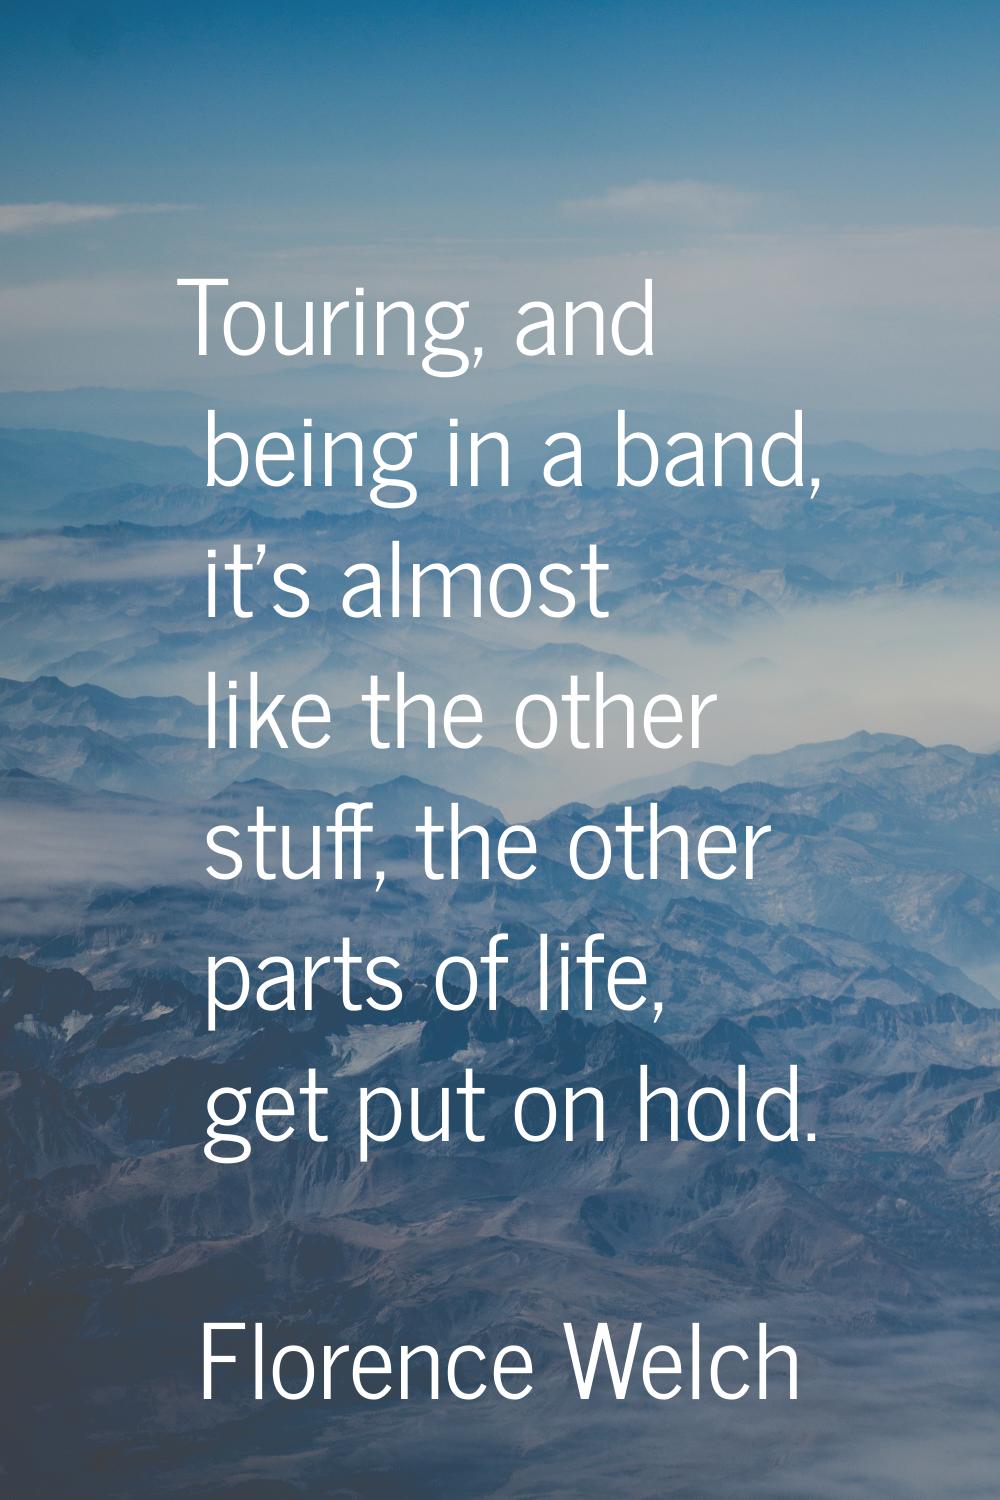 Touring, and being in a band, it's almost like the other stuff, the other parts of life, get put on